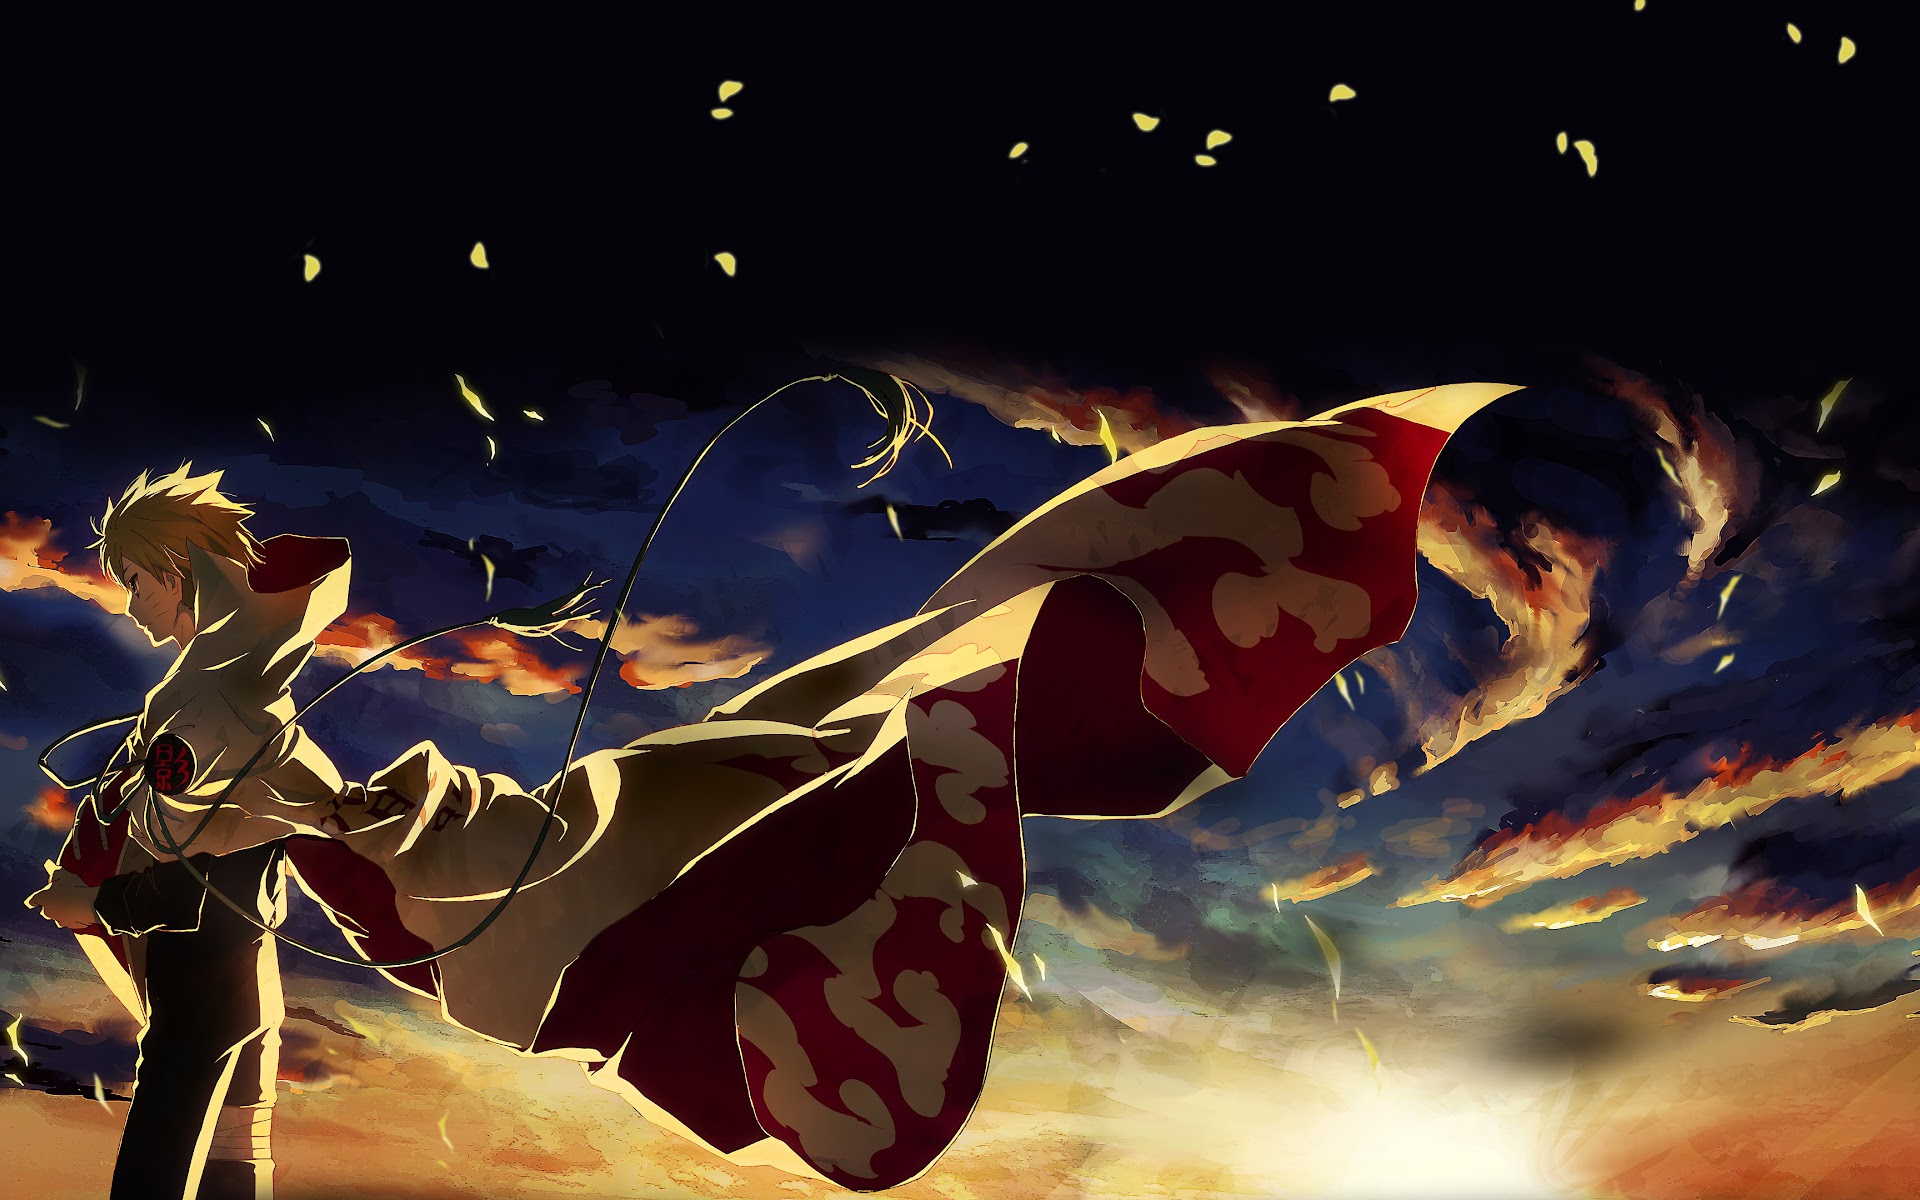 Cool NarutoWallpapers